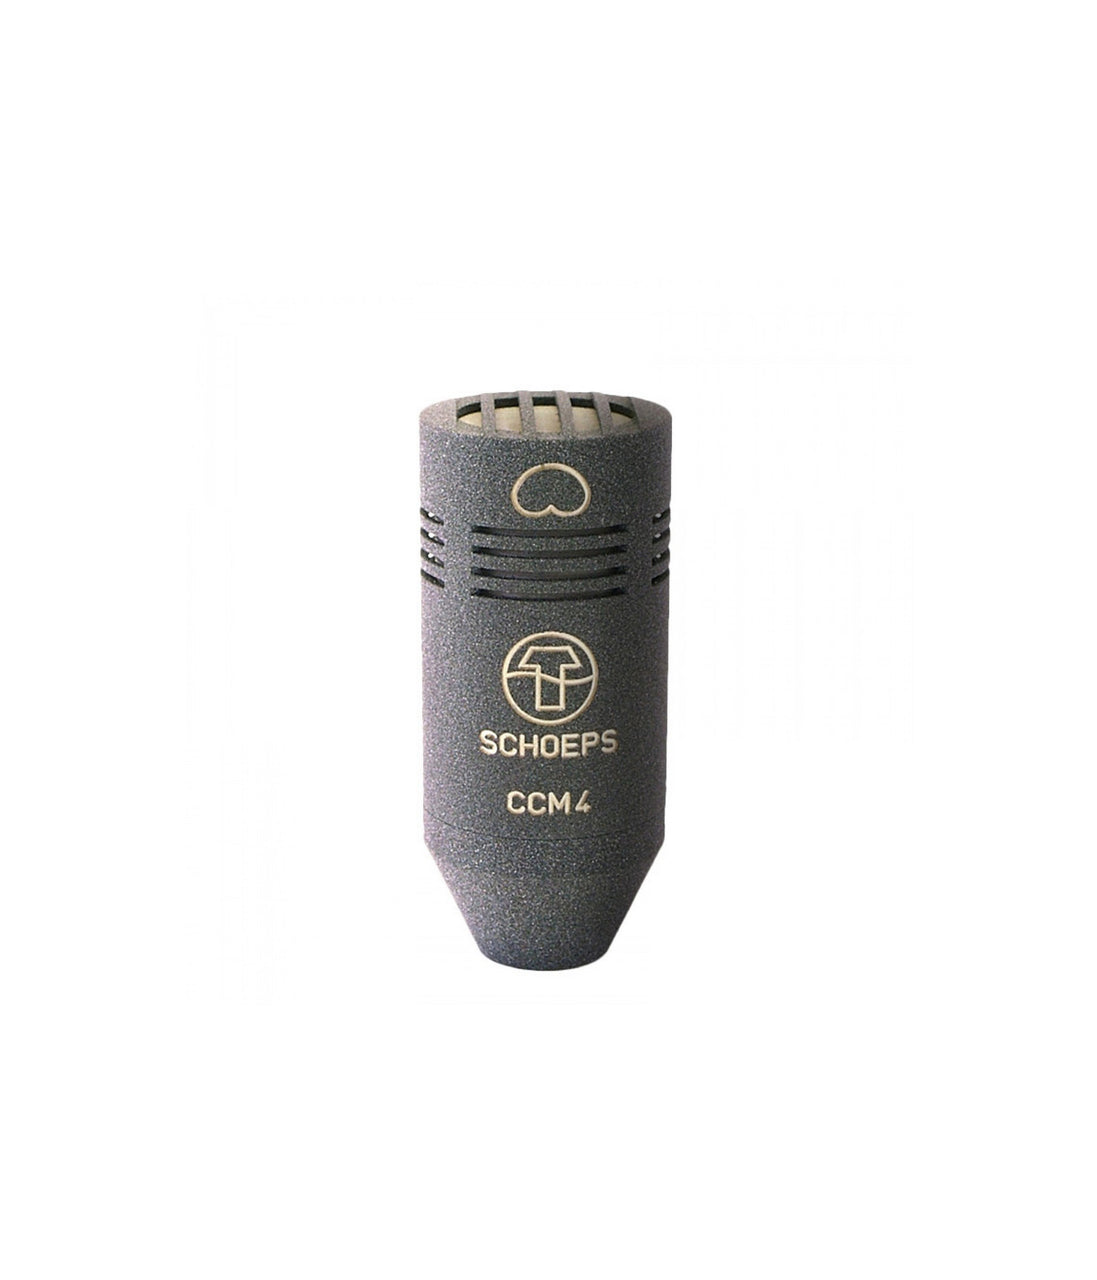 Schoeps CCM 4 Lg Cardioid Compact Condenser Microphone with Classic Unidirectional Pattern | Matte Black